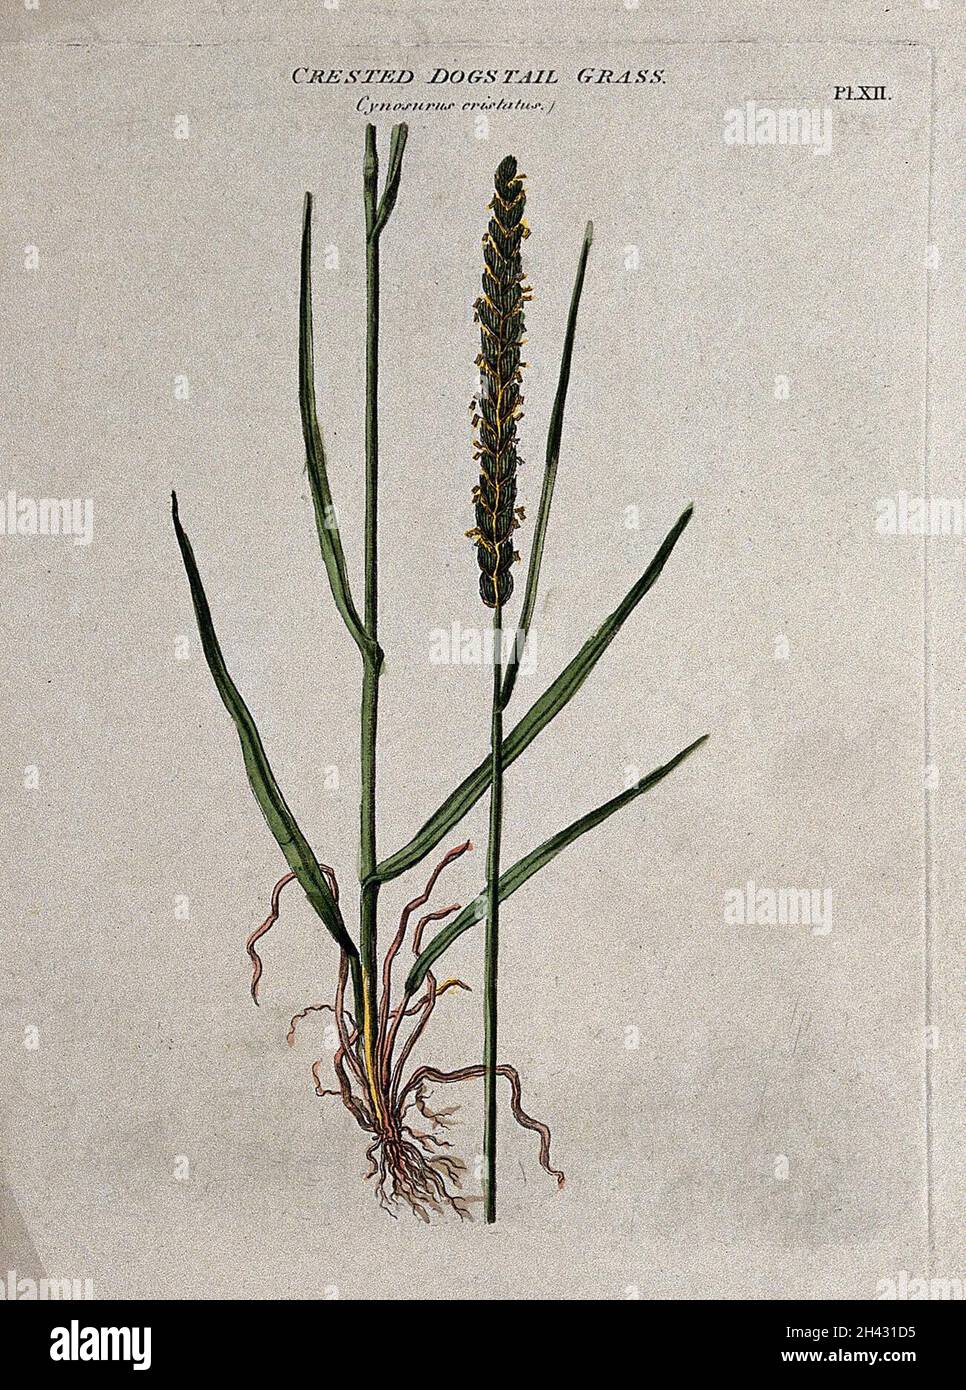 Crested dog's-tail grass (Cynosurus cristatus): seedhead and leafy stem. Coloured etching, c. 1805. Stock Photo